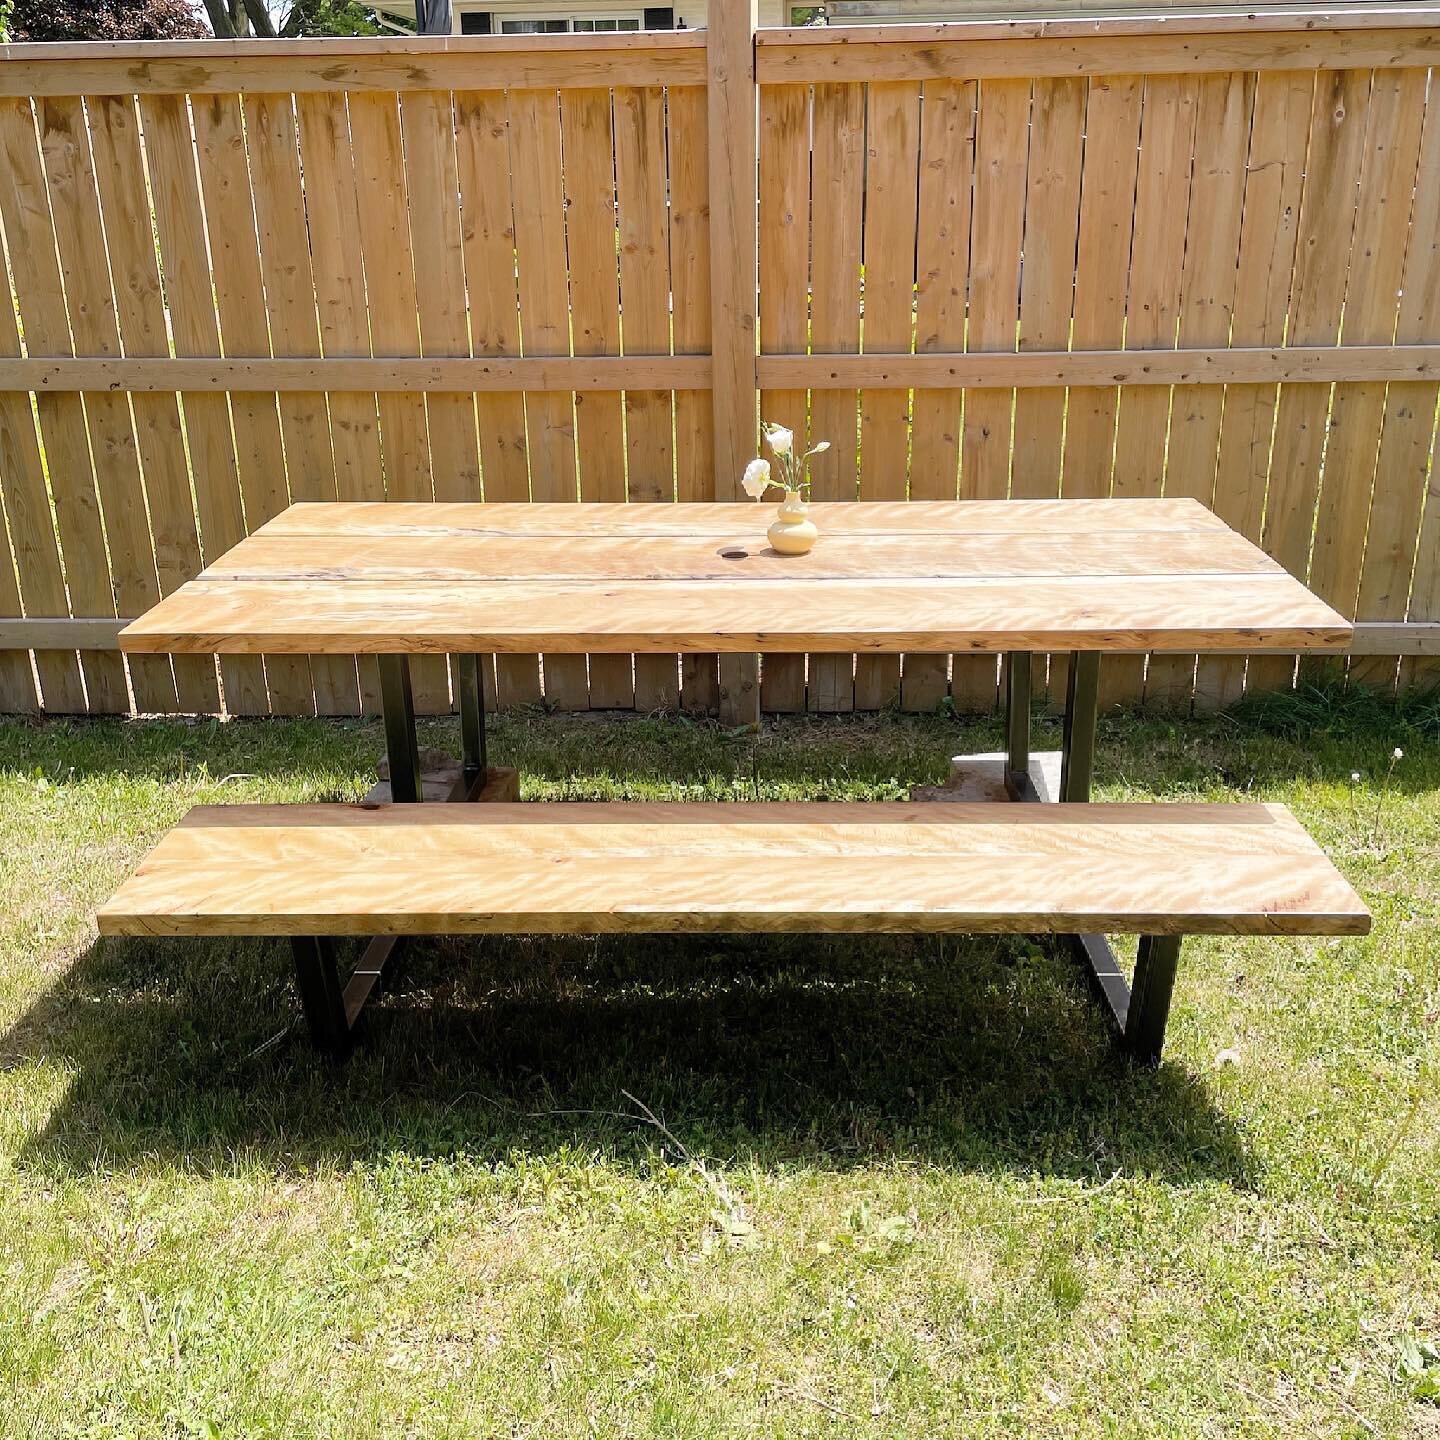 Our latest picnic-style dining table features beautiful beech wood and a steel frame. It also has an umbrella slot in the centre for some shade on these sunny days. This table is perfect for so many spaces, and can be fully customized to suit yours!
